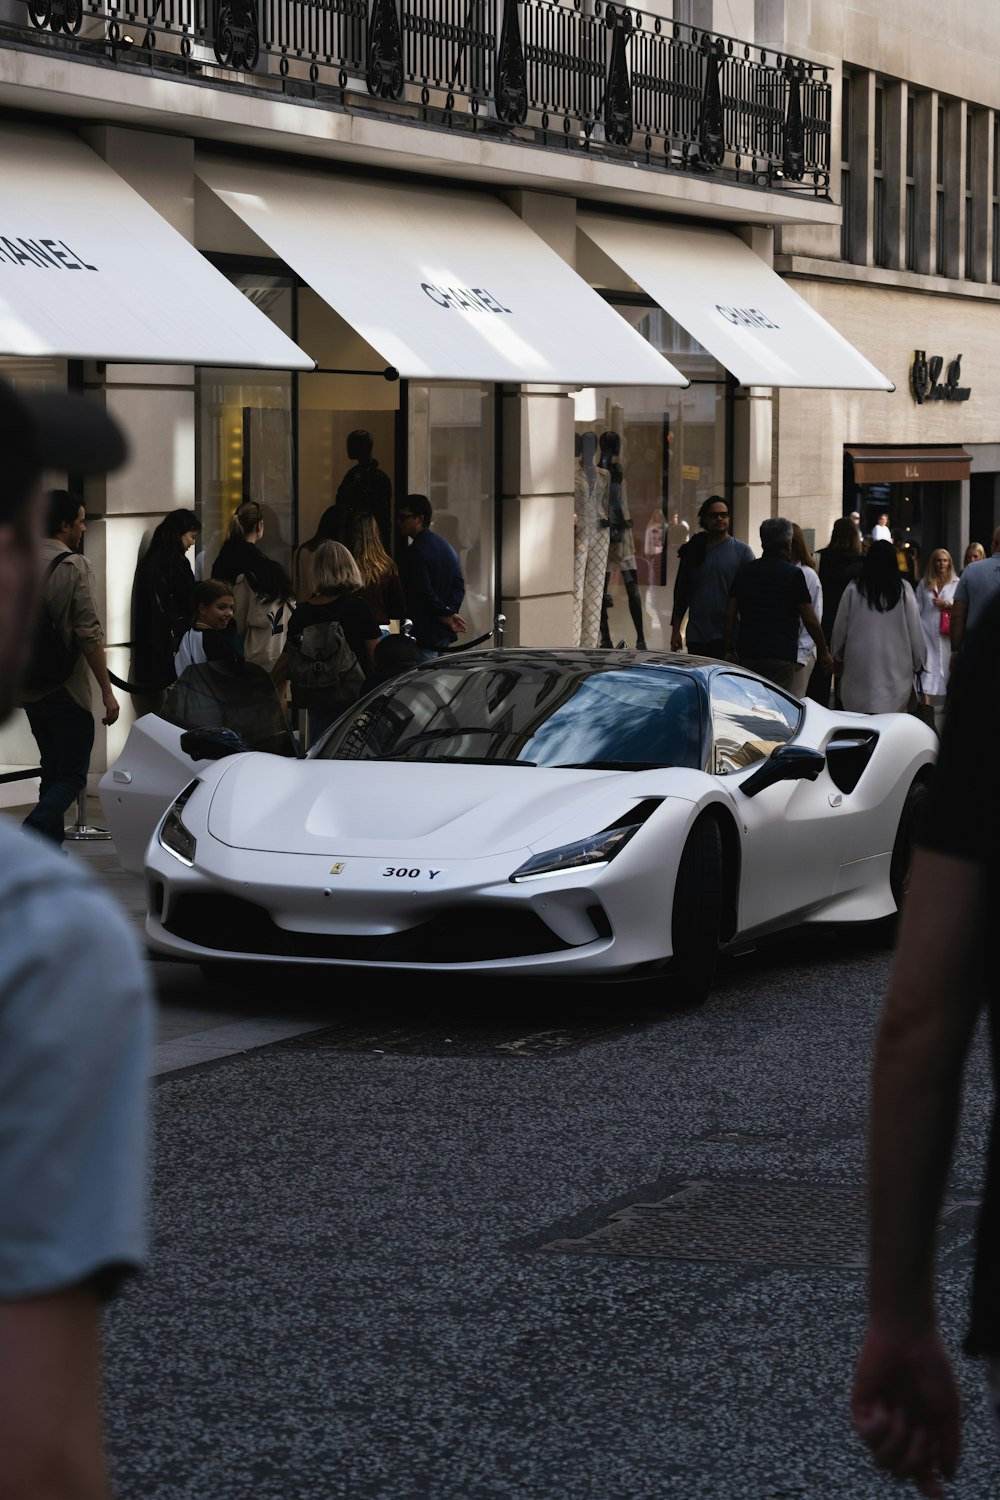 a white sports car parked in a building with people around